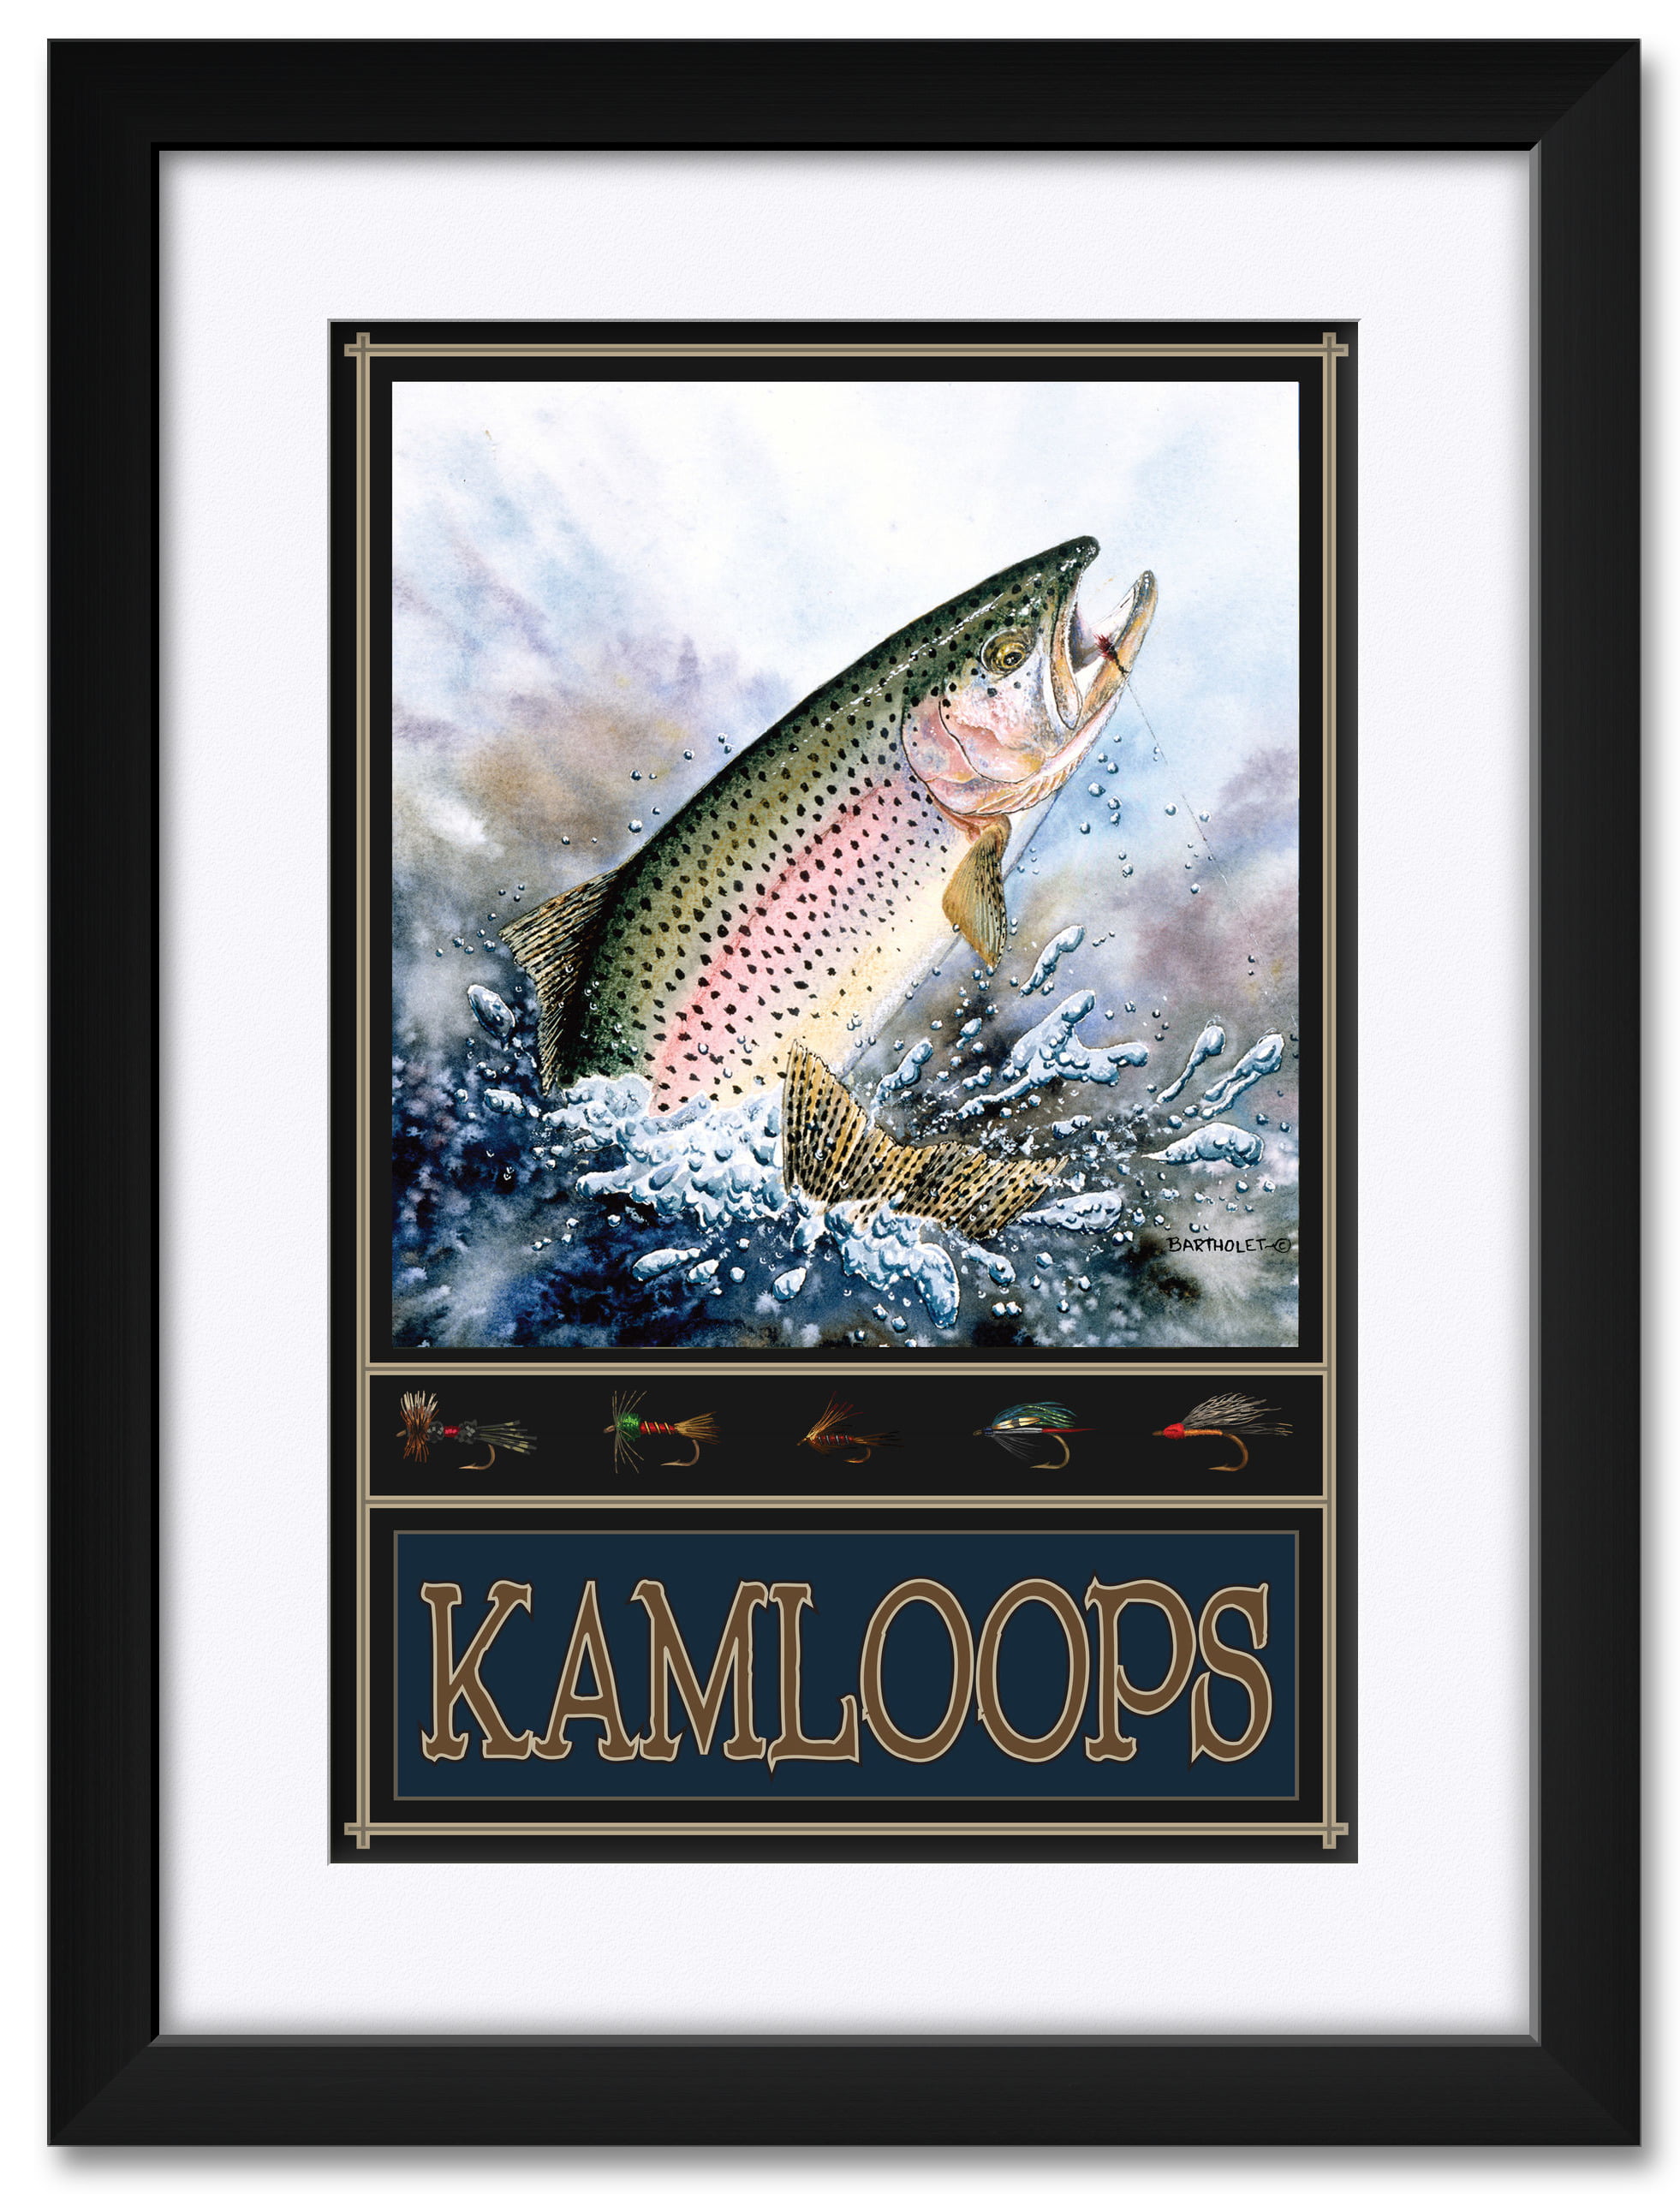 Kamloops Canada Rainbow Trout Giclee Art Print Poster from Original Watercolor by Artist Dave Bartholet